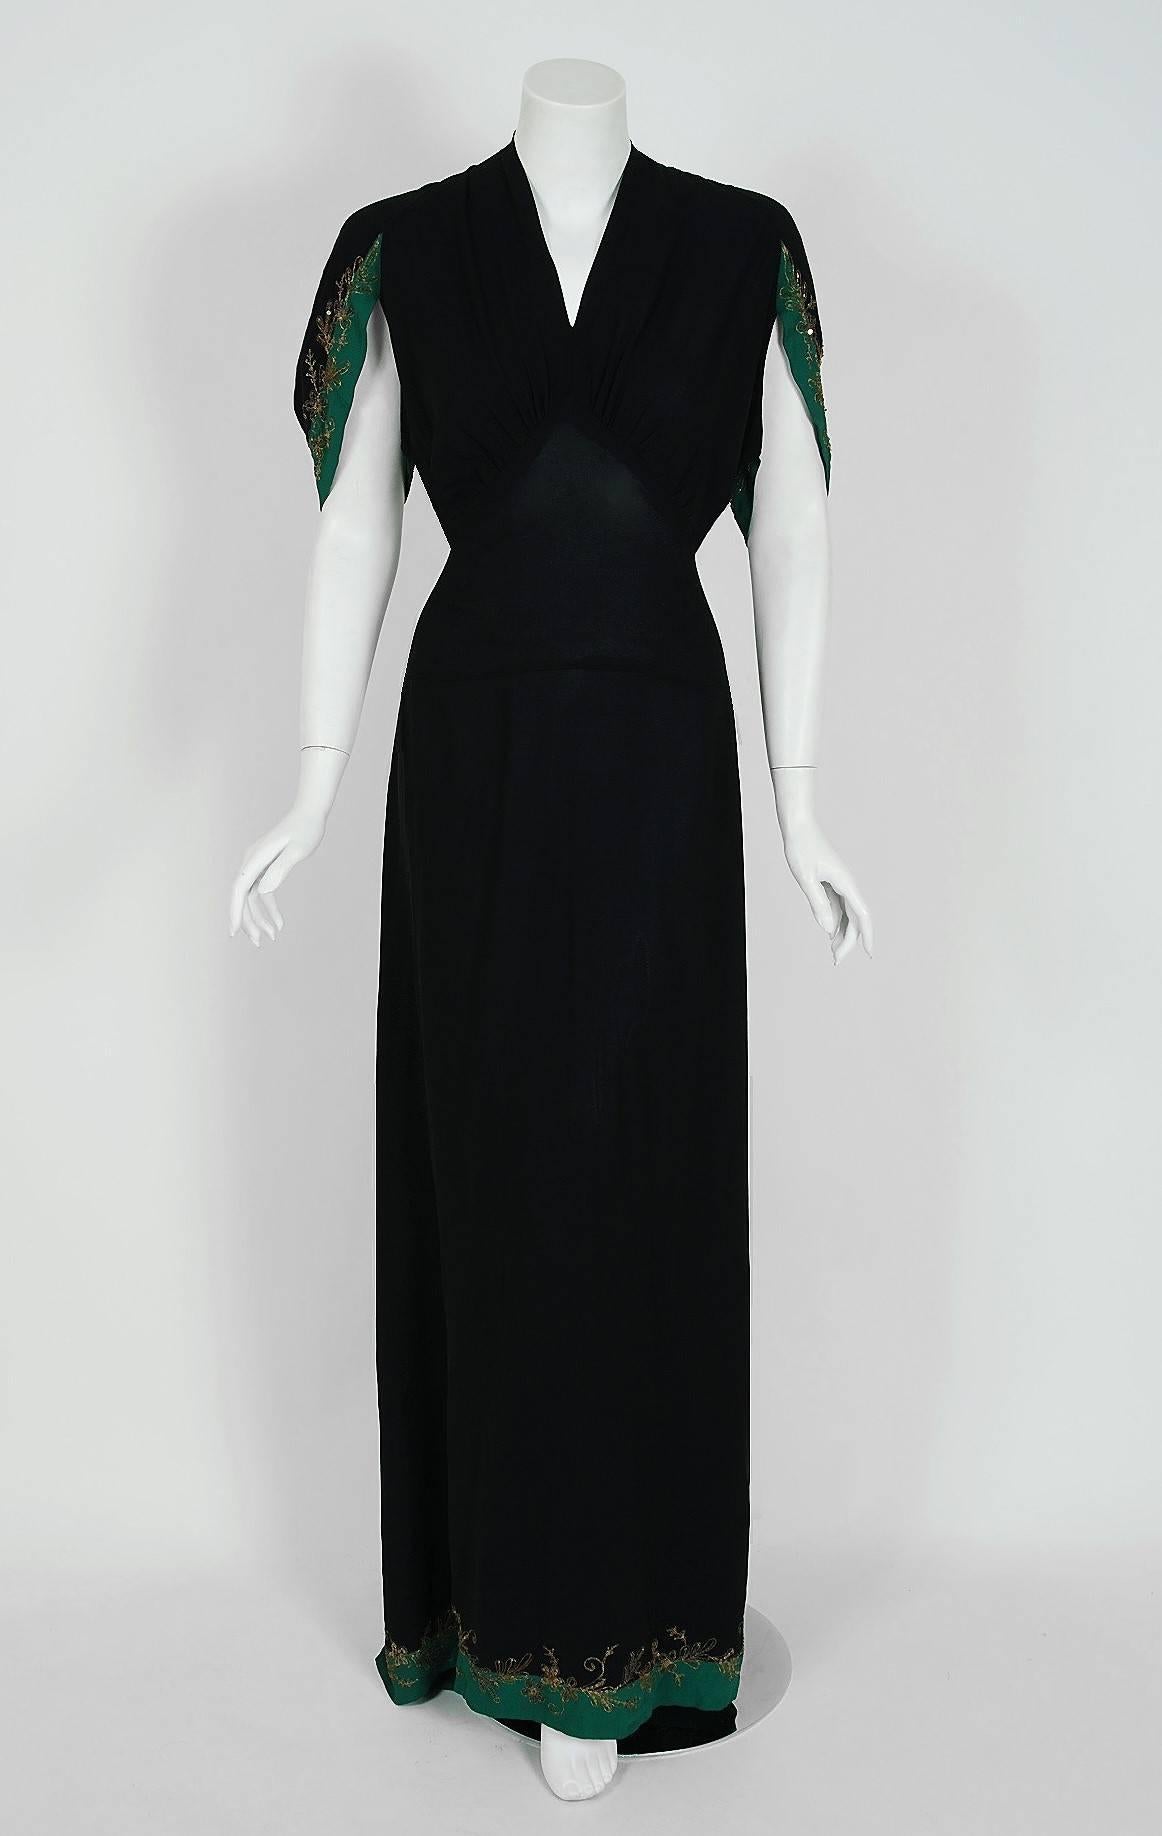 A breathtaking 1930's black and teal metallic embroidered sequin silk-rayon gown from the Old Hollywood era of glamour! The bodice is a seductive bias-cut gathered plunge with built-in sash belt. I adore the winged-sleeves which add the perfect